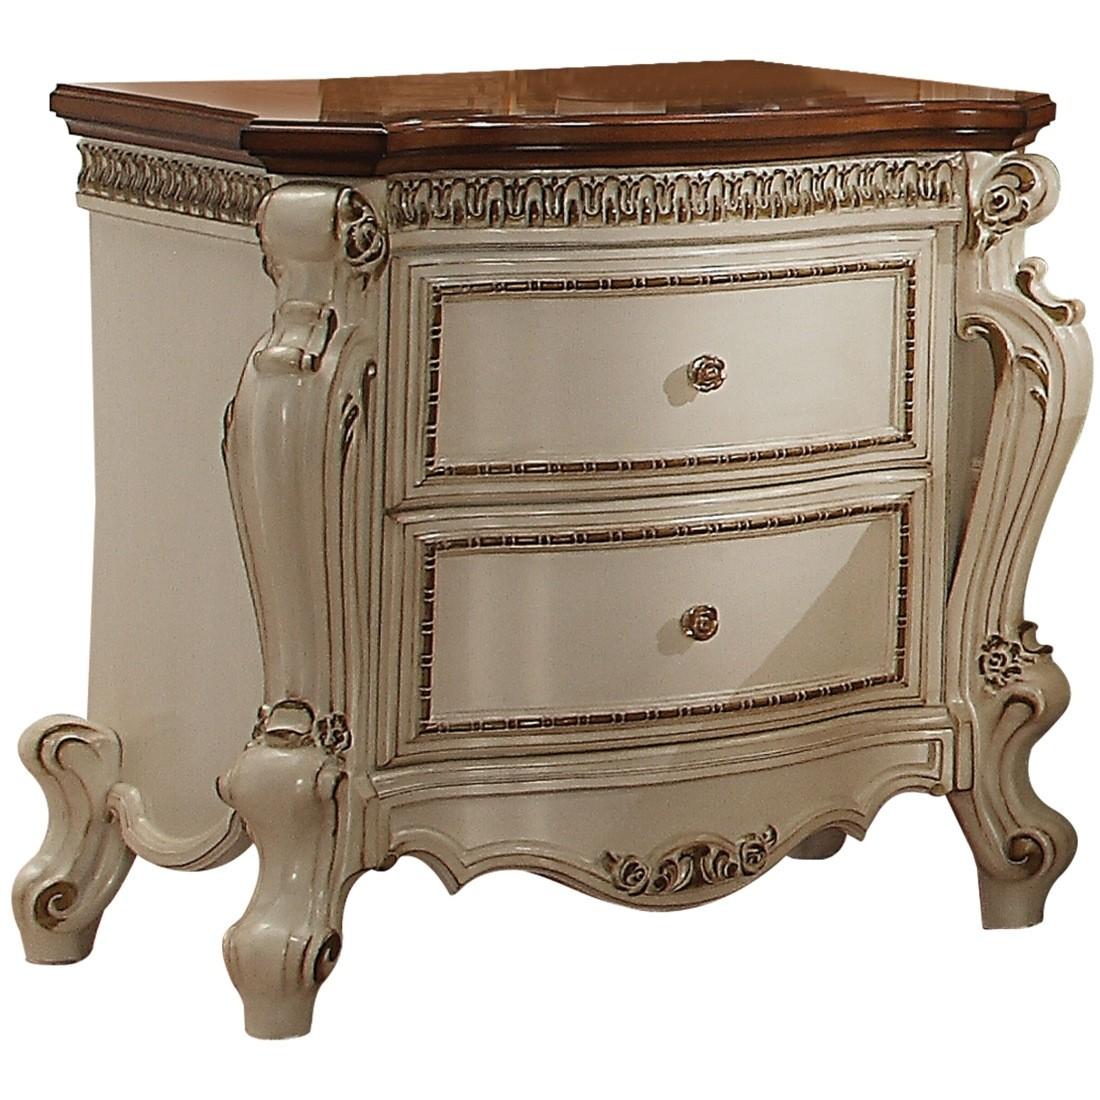 Classic, Traditional Night Stand Picardy-26903 Picardy-26903 in Oak, Pearl, Cherry, Antique 